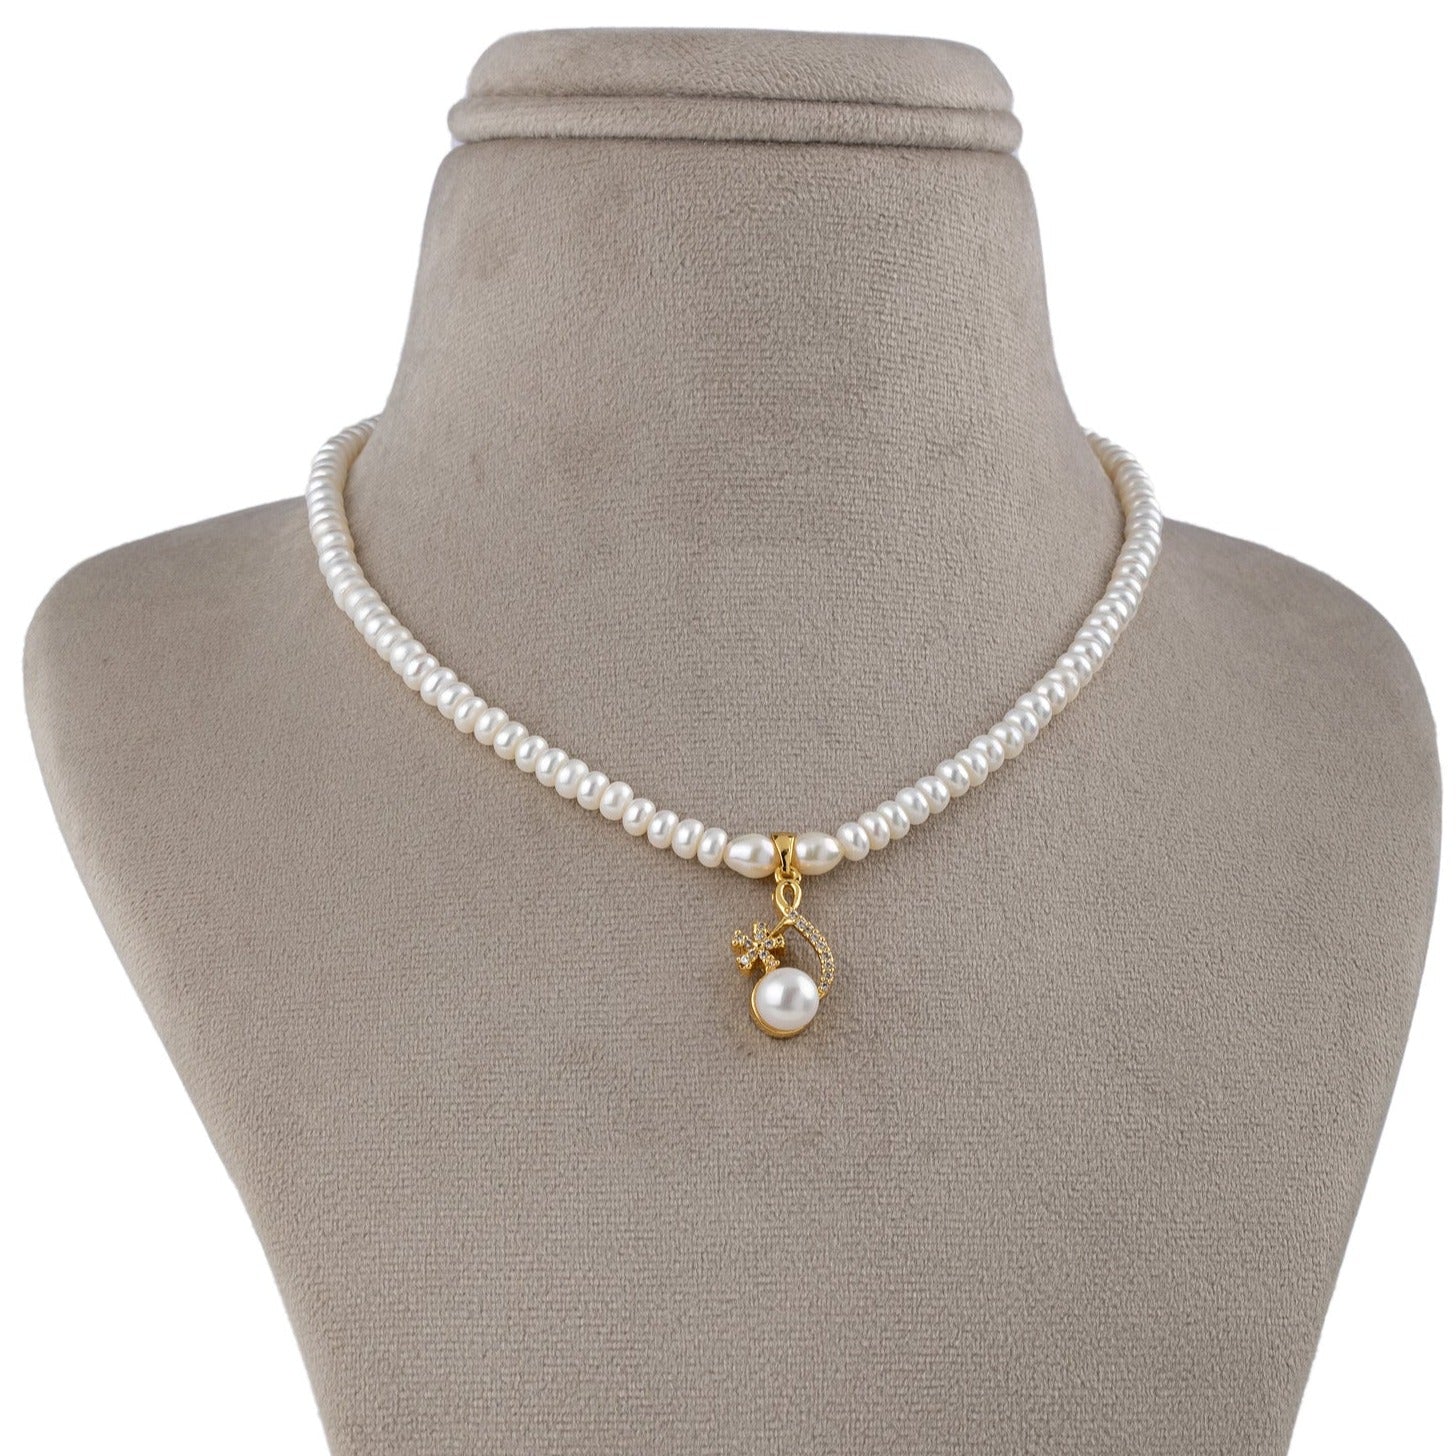 Blushing Beauty Pearl Necklace Set